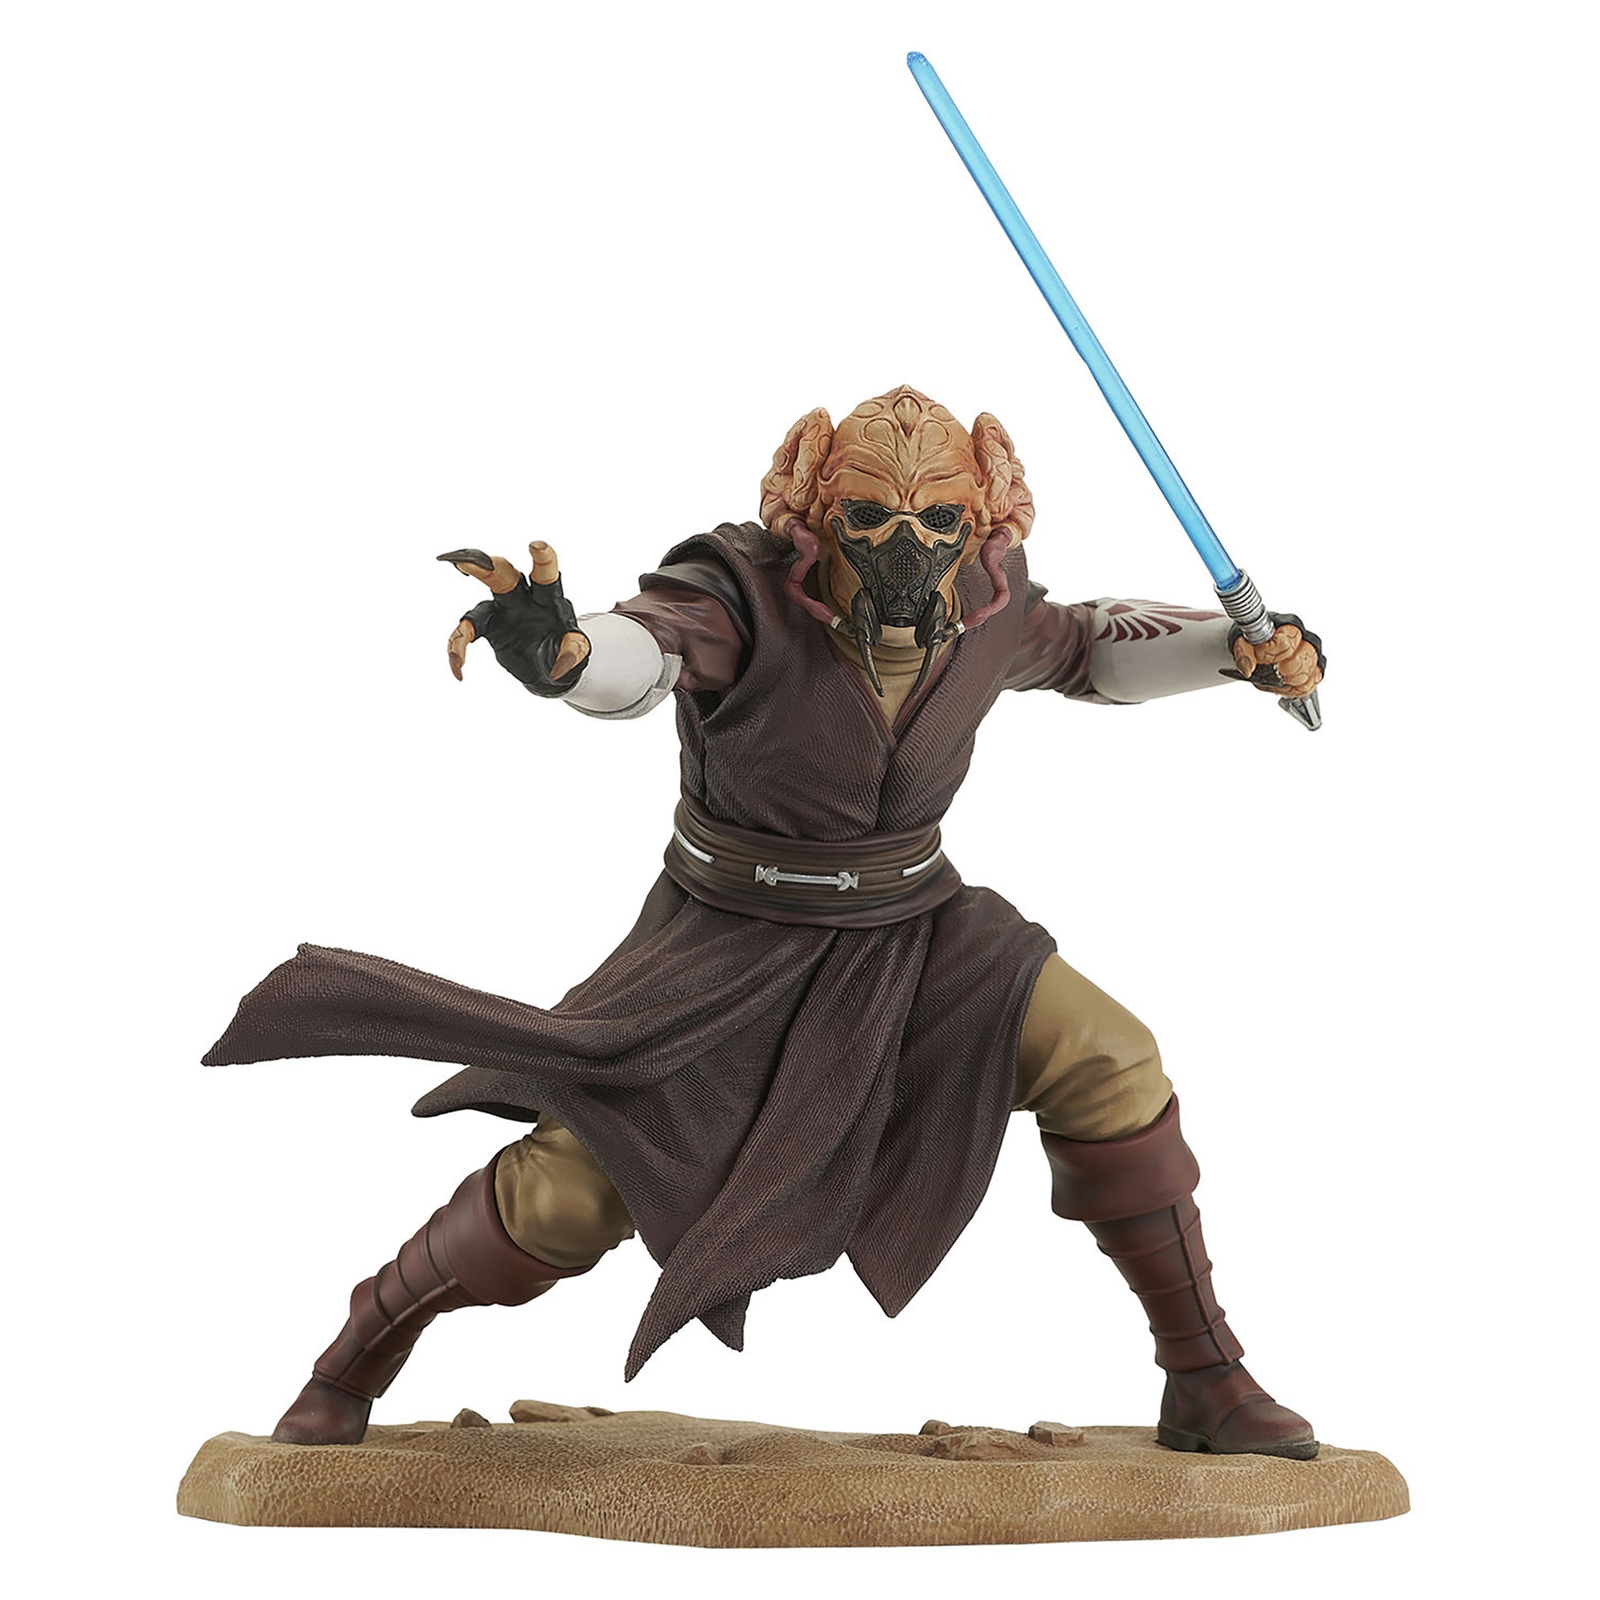 Gentle Giant Star Wars Premier Collection Attack of the Clones Plo Koon Statue - 11